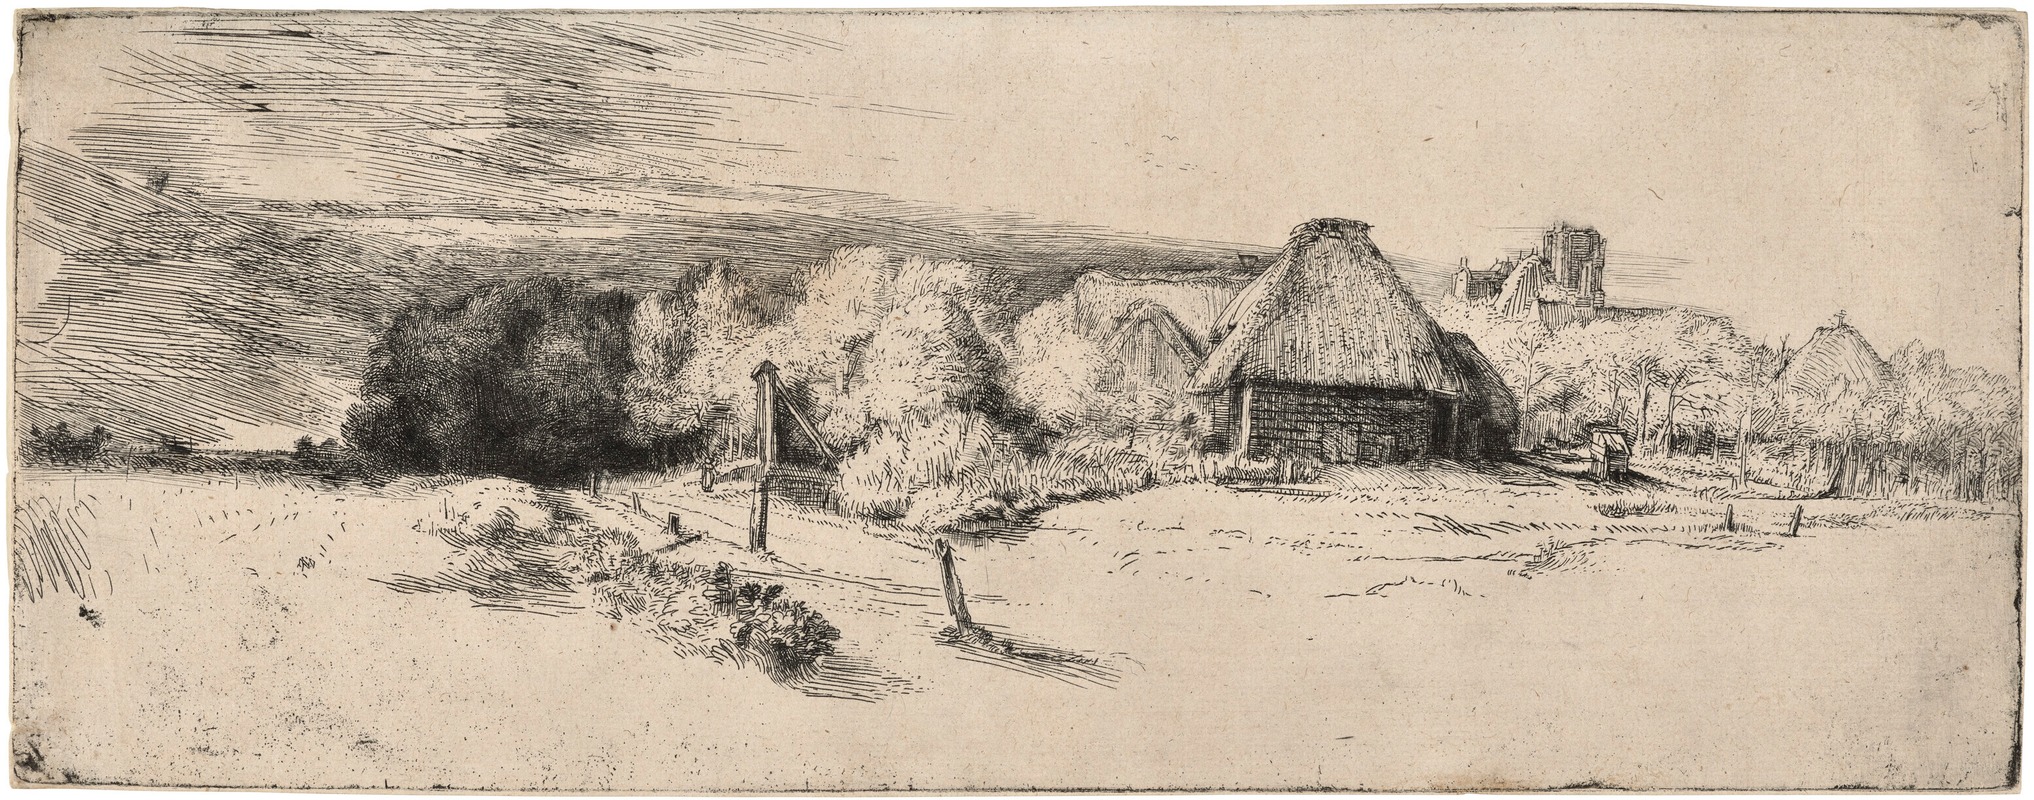 Rembrandt van Rijn - Landscape with a Farm Building and the ‘House with the Tower’